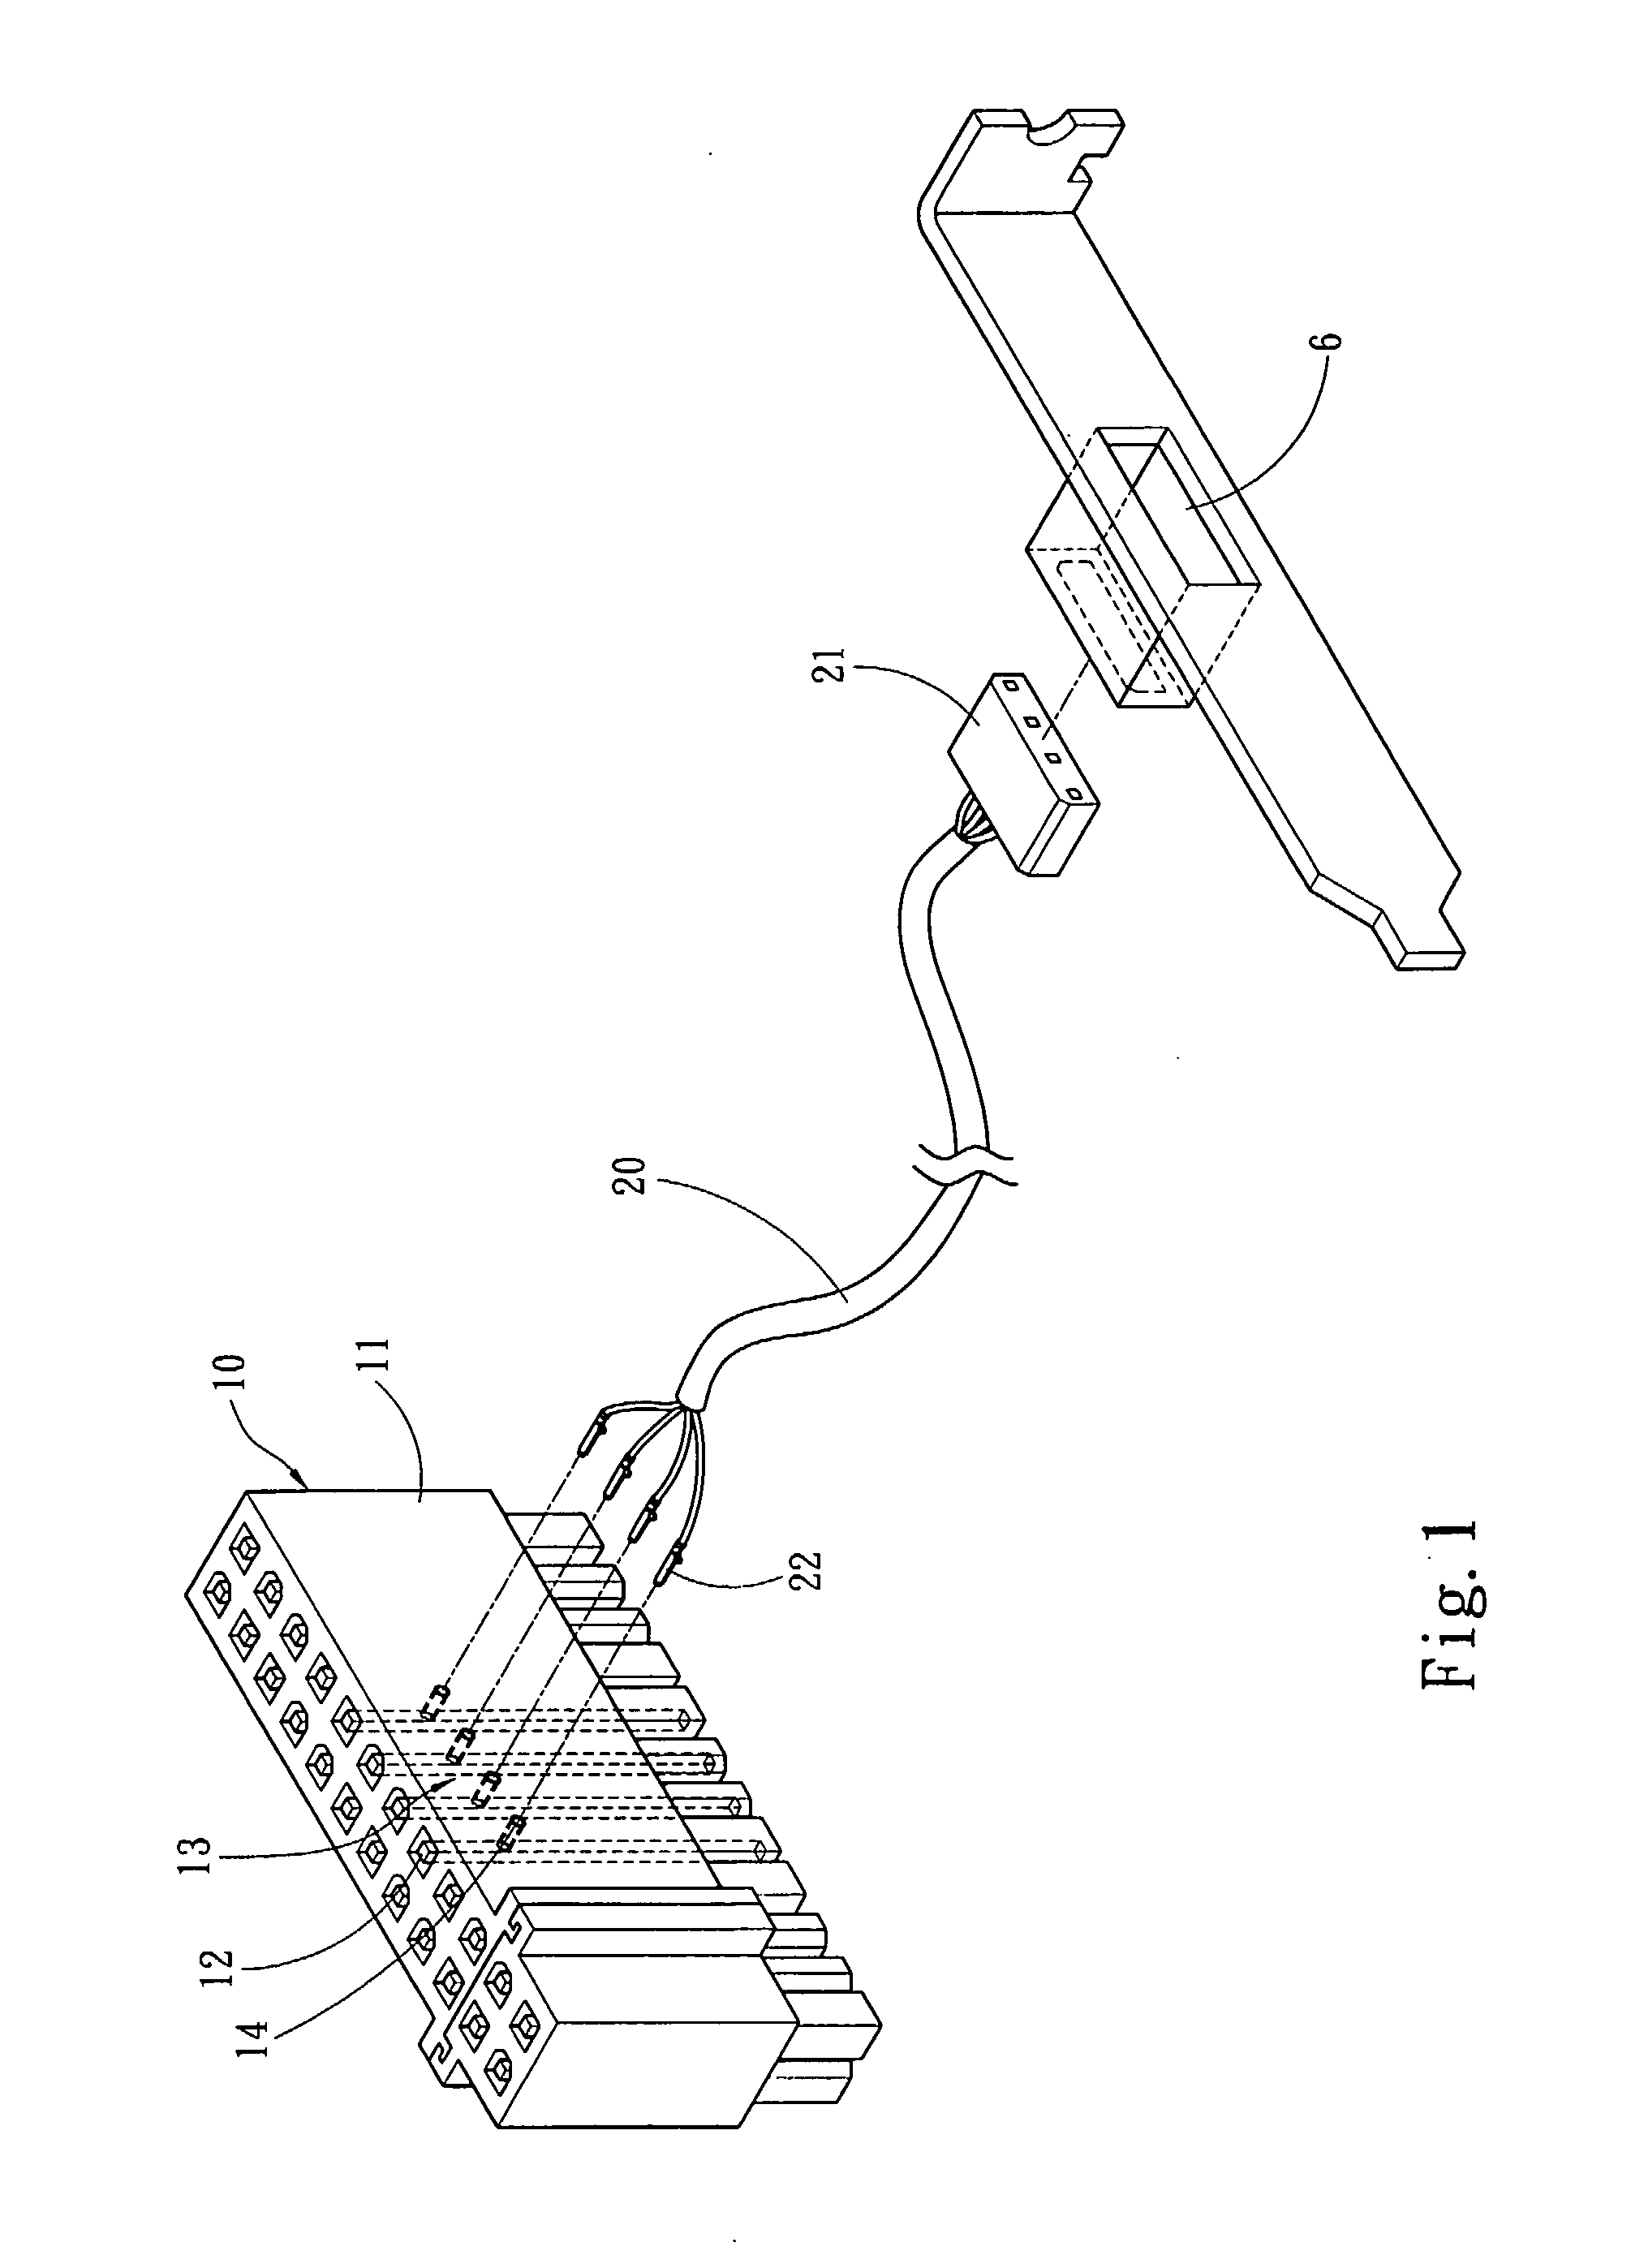 Electric power connector adapting structure